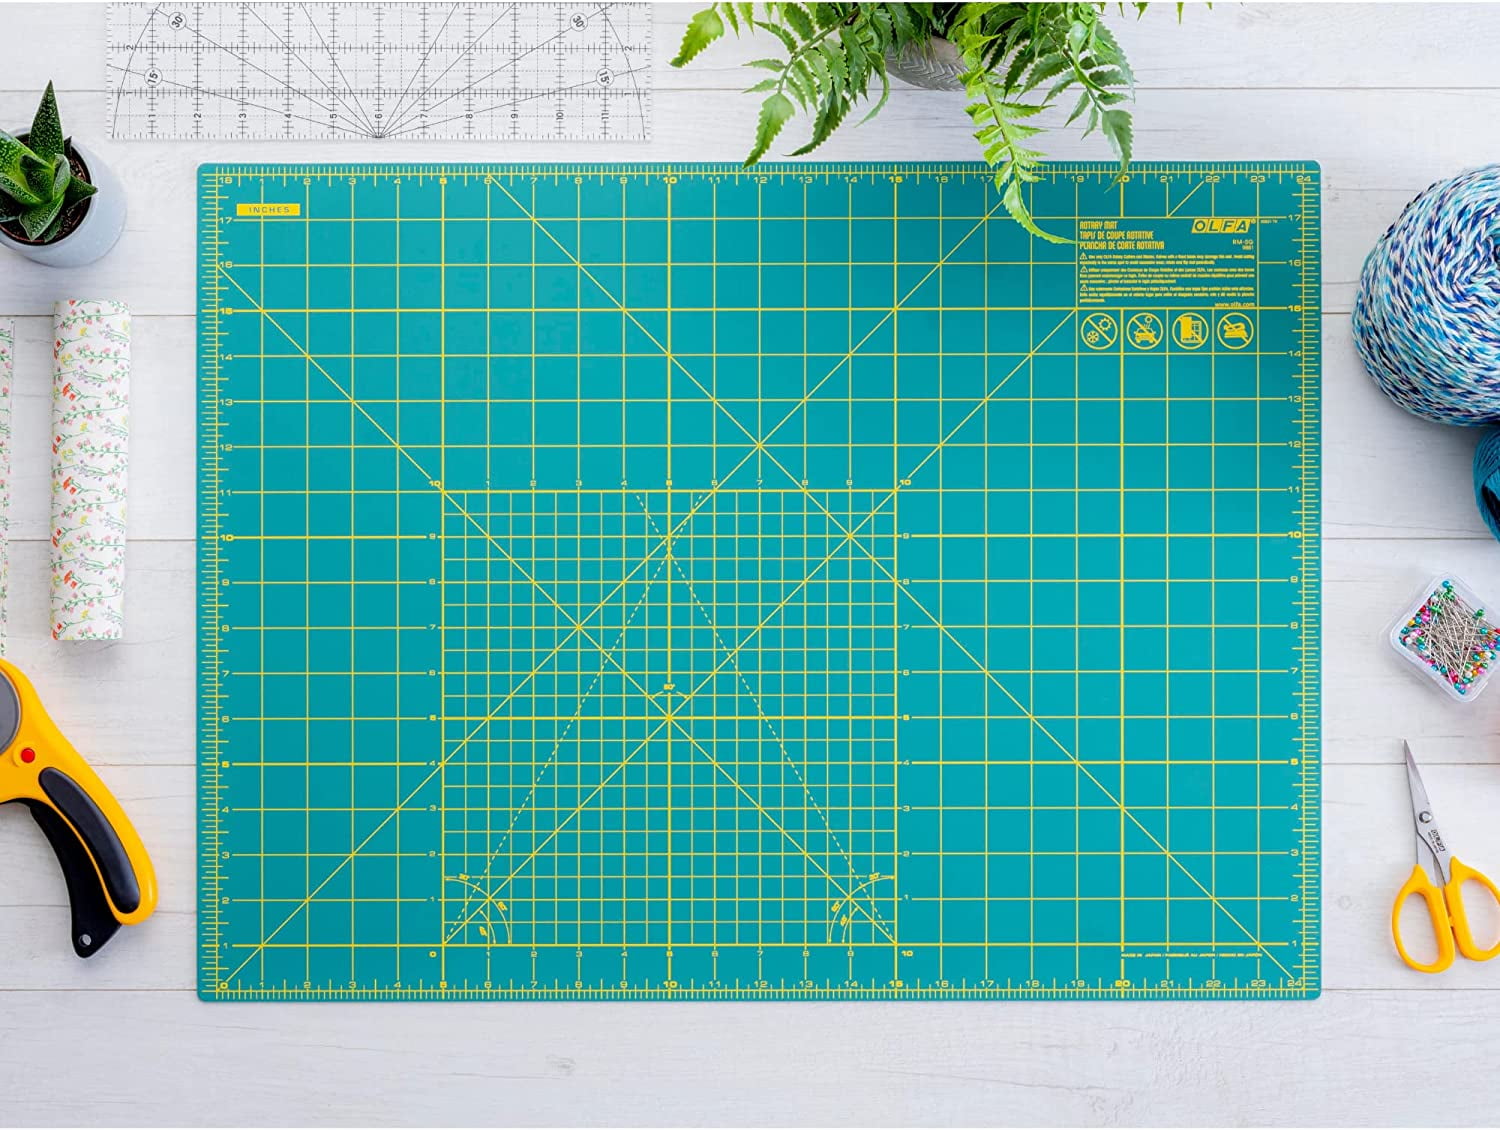 SE Cmg2418 24-Inch by 18-inch Double Sided Cutting Mat